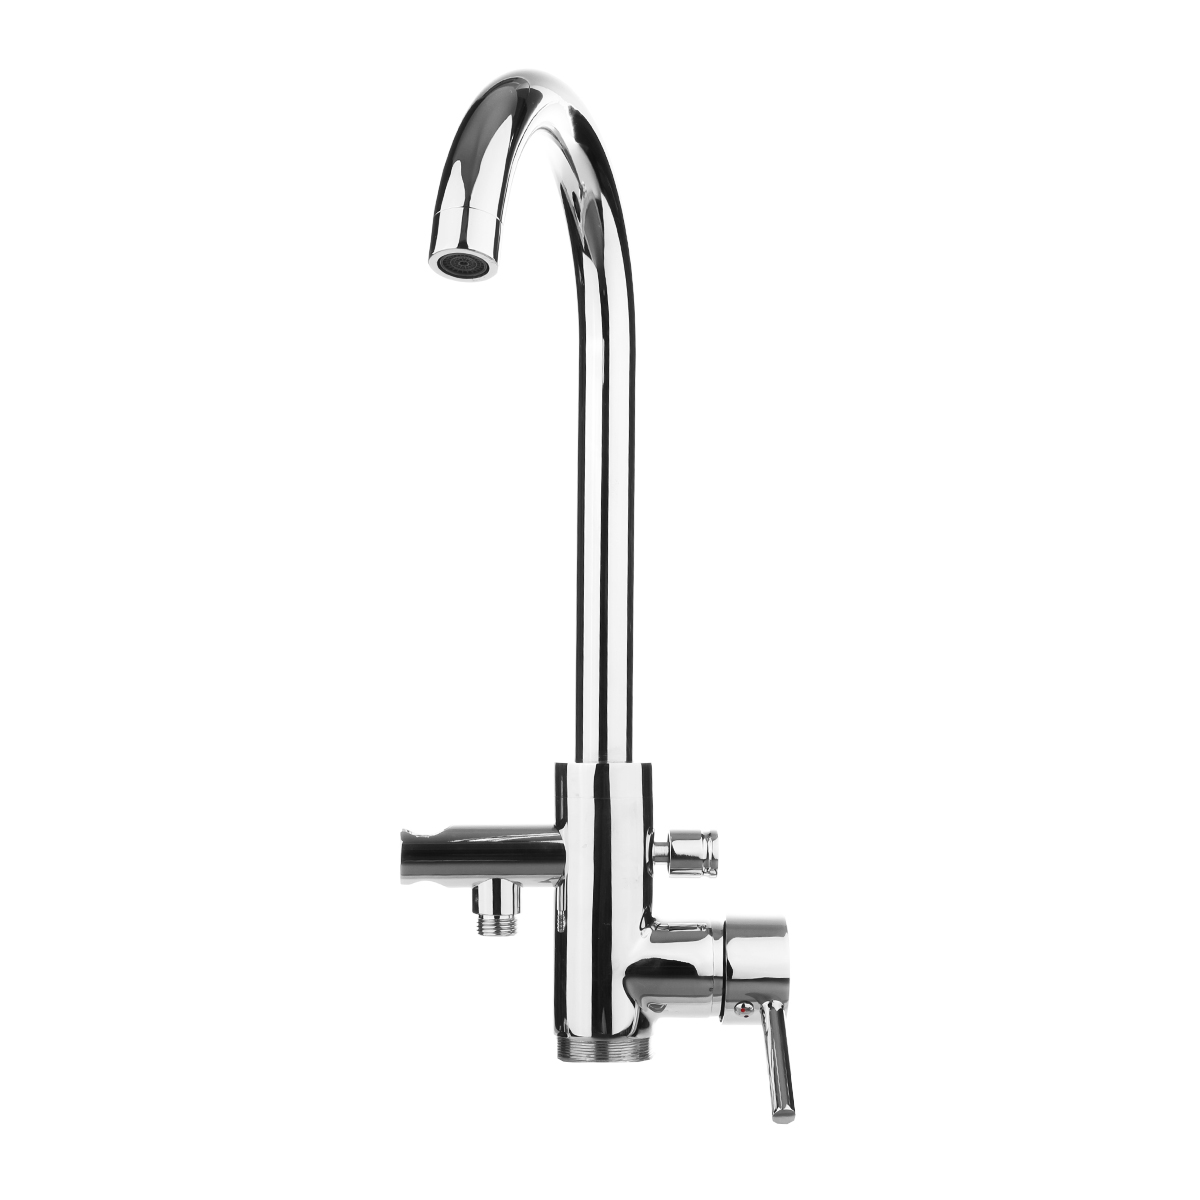 Chrome-Curved-Round-Freestanding-Tap-Bathroom-Tub-Faucet-with-Bath-Shower-Head-1407274